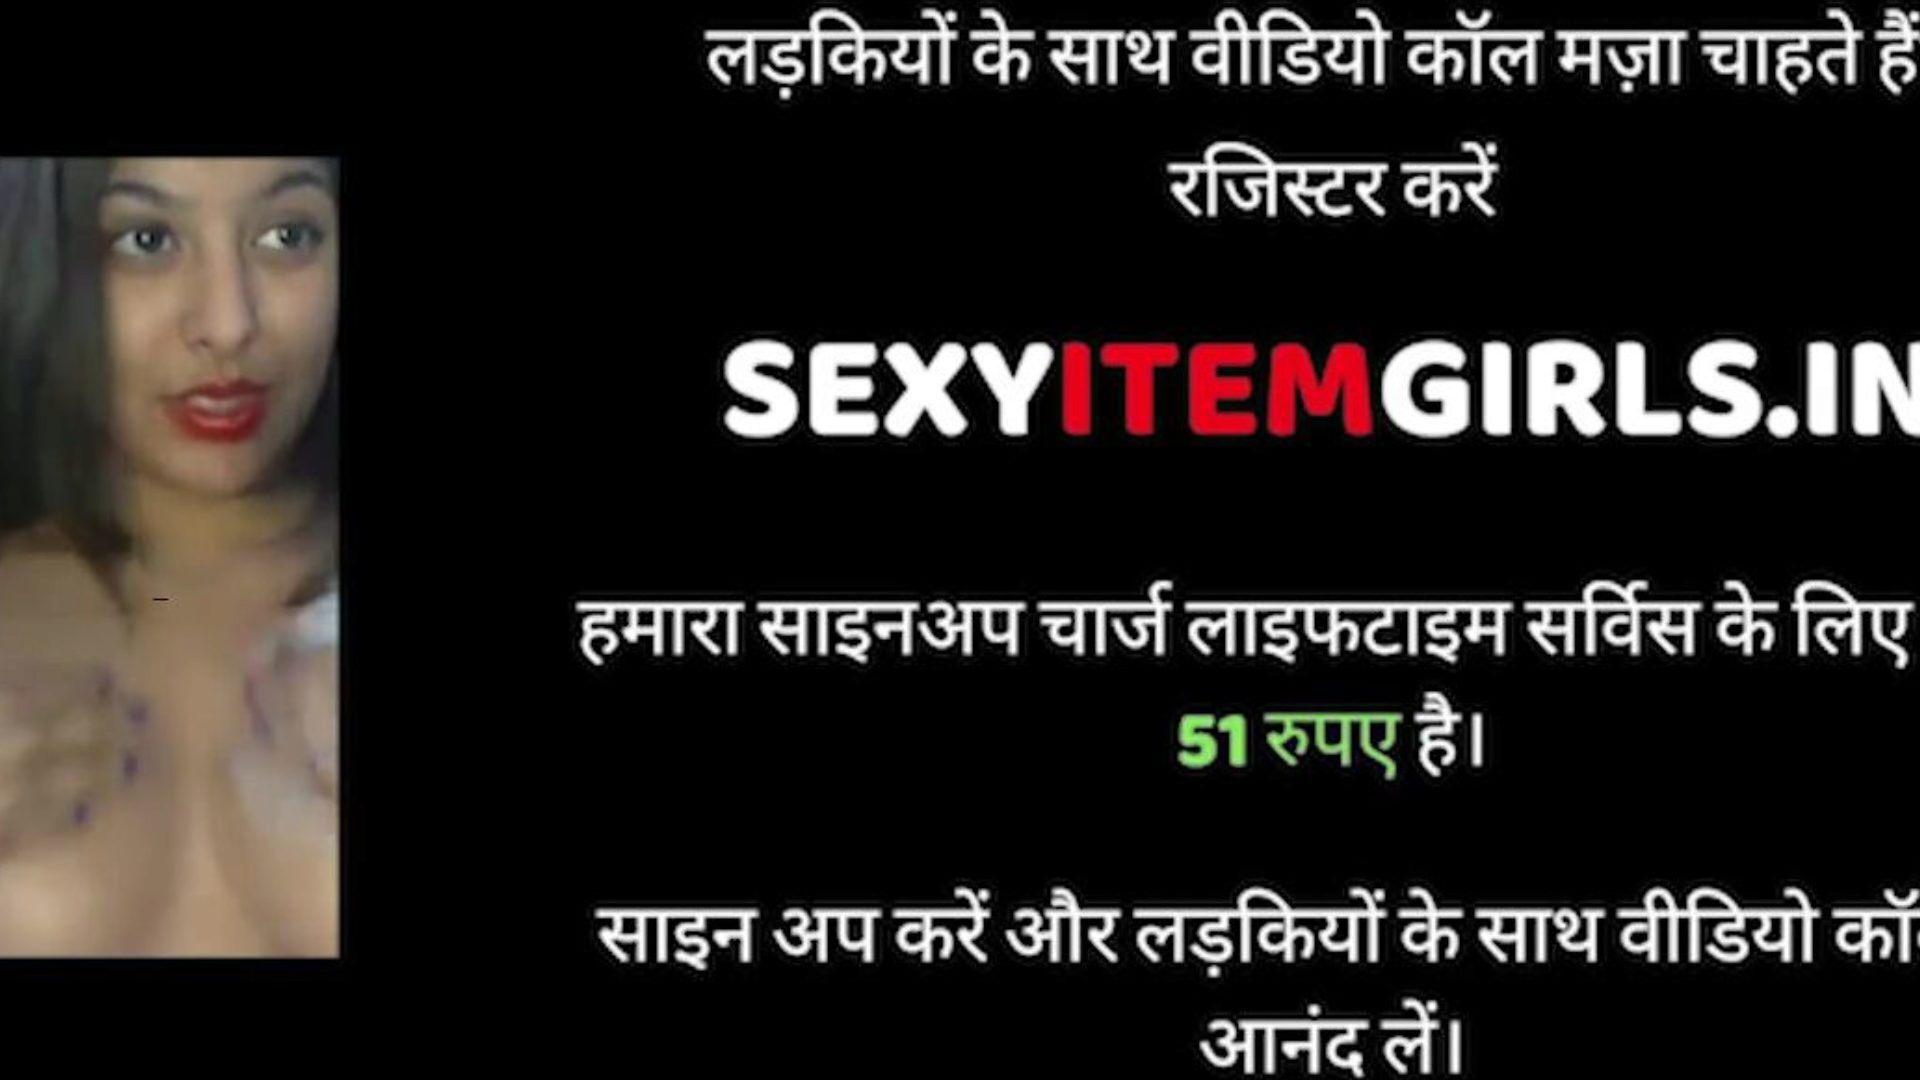 Finaly Girlfriend Ne Liya Chod Diya, Free Porn 2c: xHamster Watch Finaly Girlfriend Ne Liya Chod Diya clip on xHamster, the superlatively good HD bang-out tube web page with tons of free Indian Girl and Boys & Home Made pornography episodes